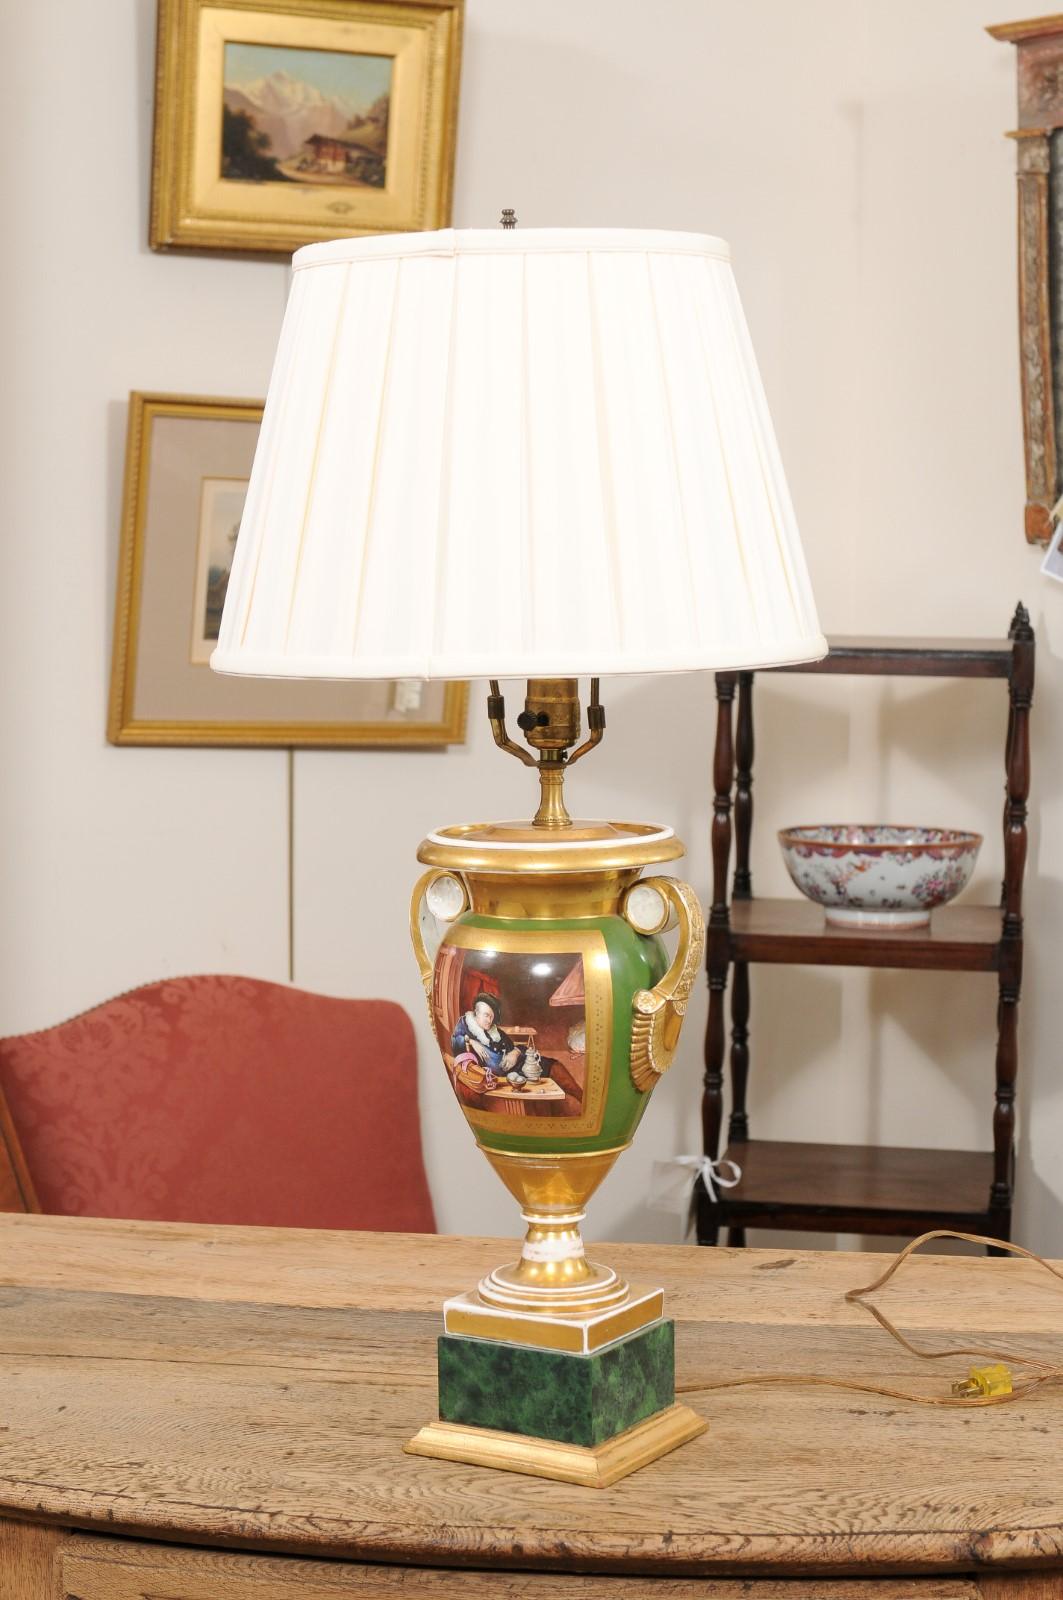 Large 19th Century Paris Porcelain Vase wired as a Lamp In Good Condition For Sale In Atlanta, GA